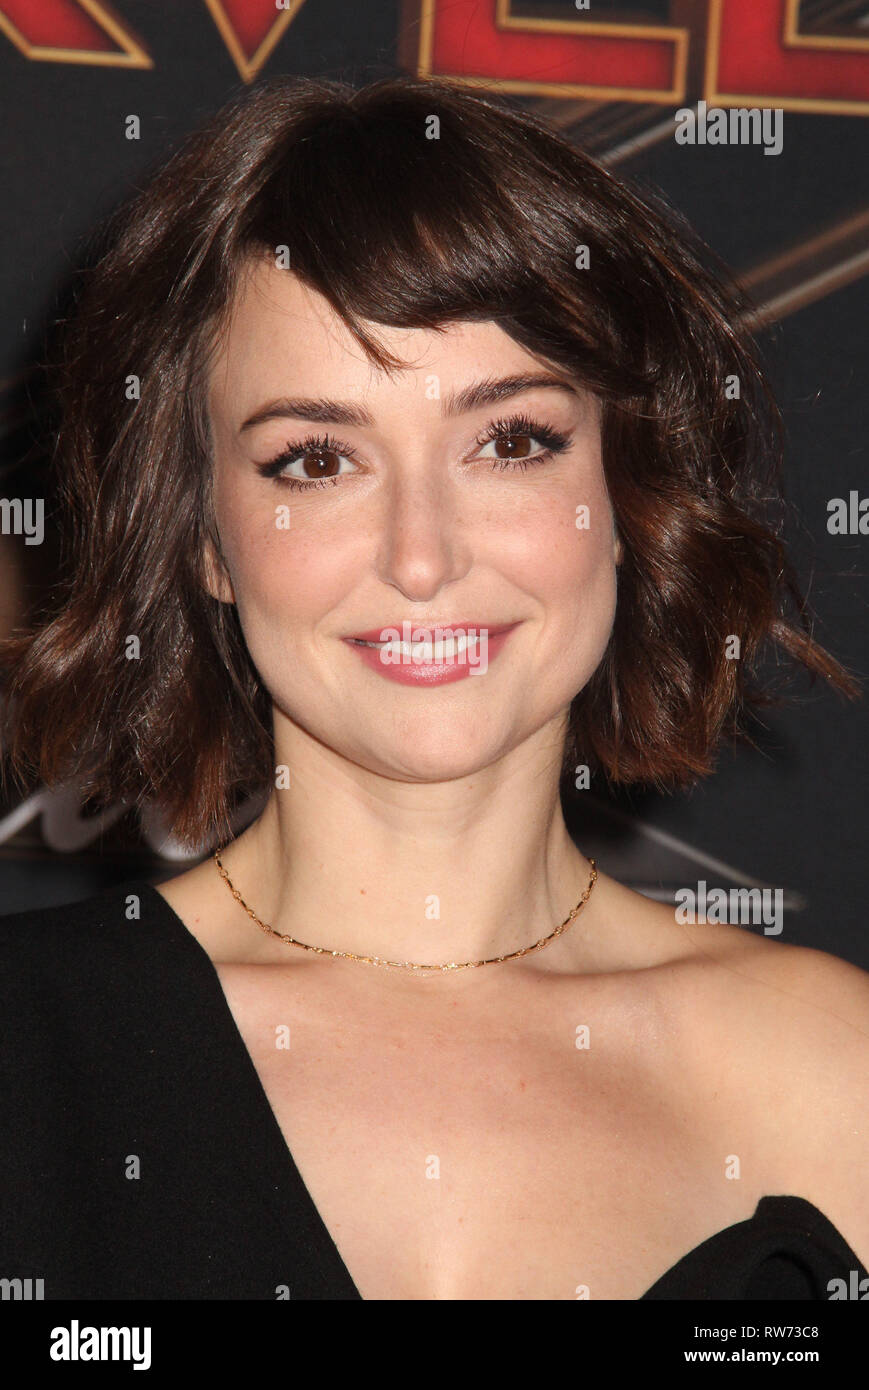 Los Angeles, California, USA. 4th March, 2019. Milana Vayntrub 03/04/2019 The World Premiere of 'Captain Marvel' held at the El Capitan Theatre in Los Angeles, CA Photo by Izumi Hasegawa/HollywoodNewsWire.co Credit: Hollywood News Wire Inc./Alamy Live News Credit: Hollywood News Wire Inc./Alamy Live News Stock Photo